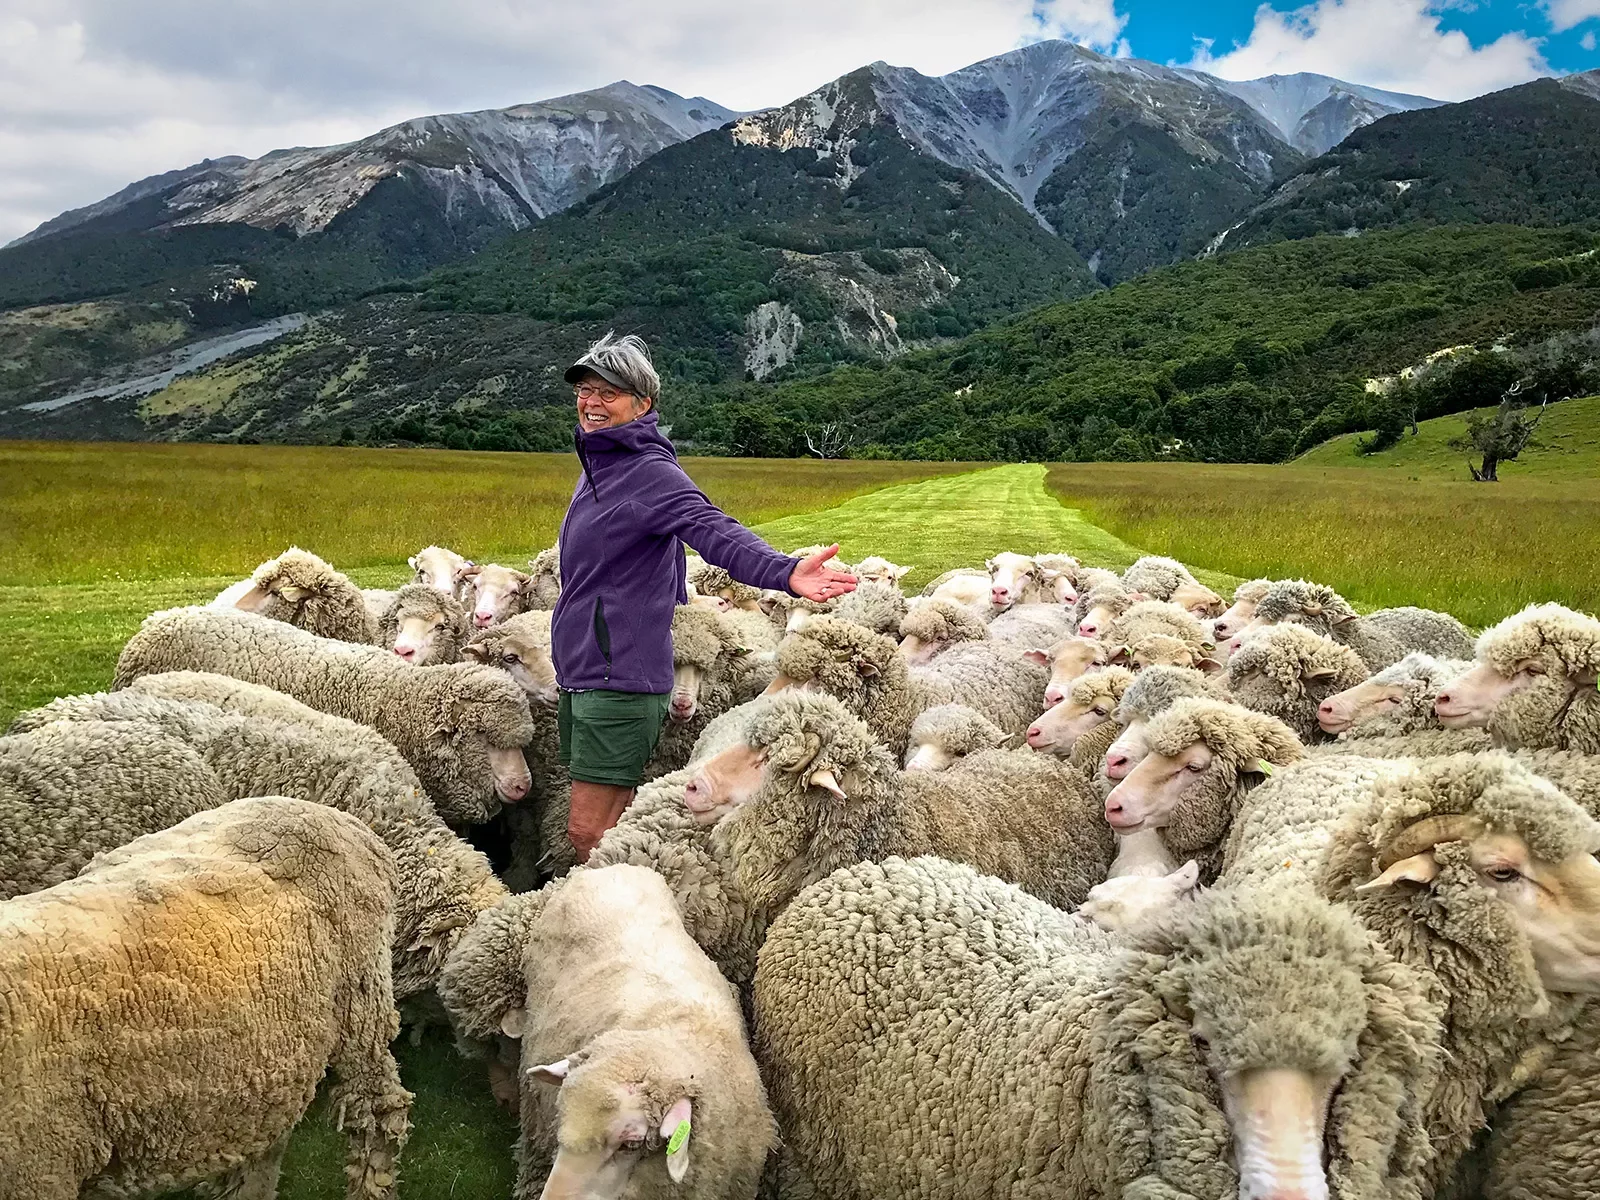 Woman surrounded by sheep in New Zealand